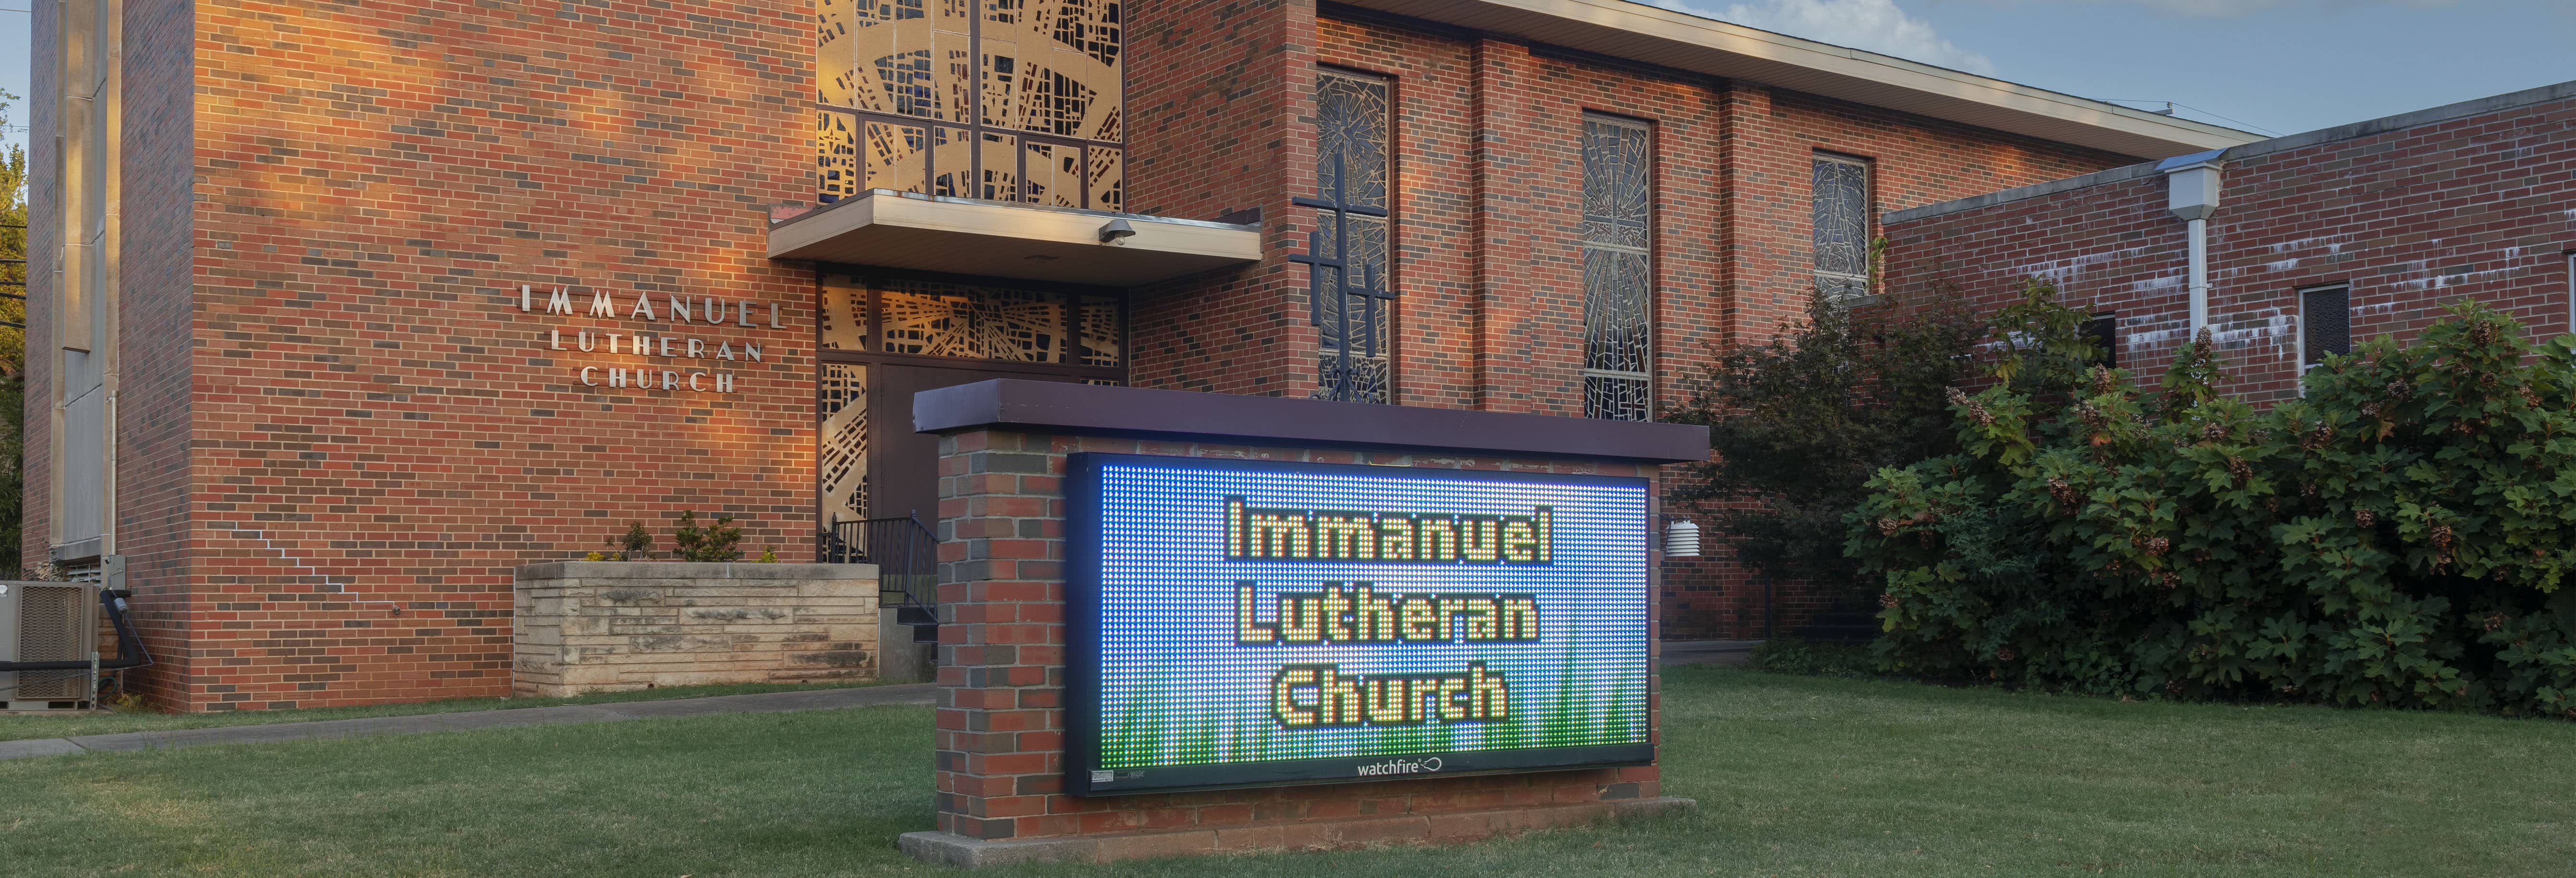 Exterior of Immanuel Lutheran